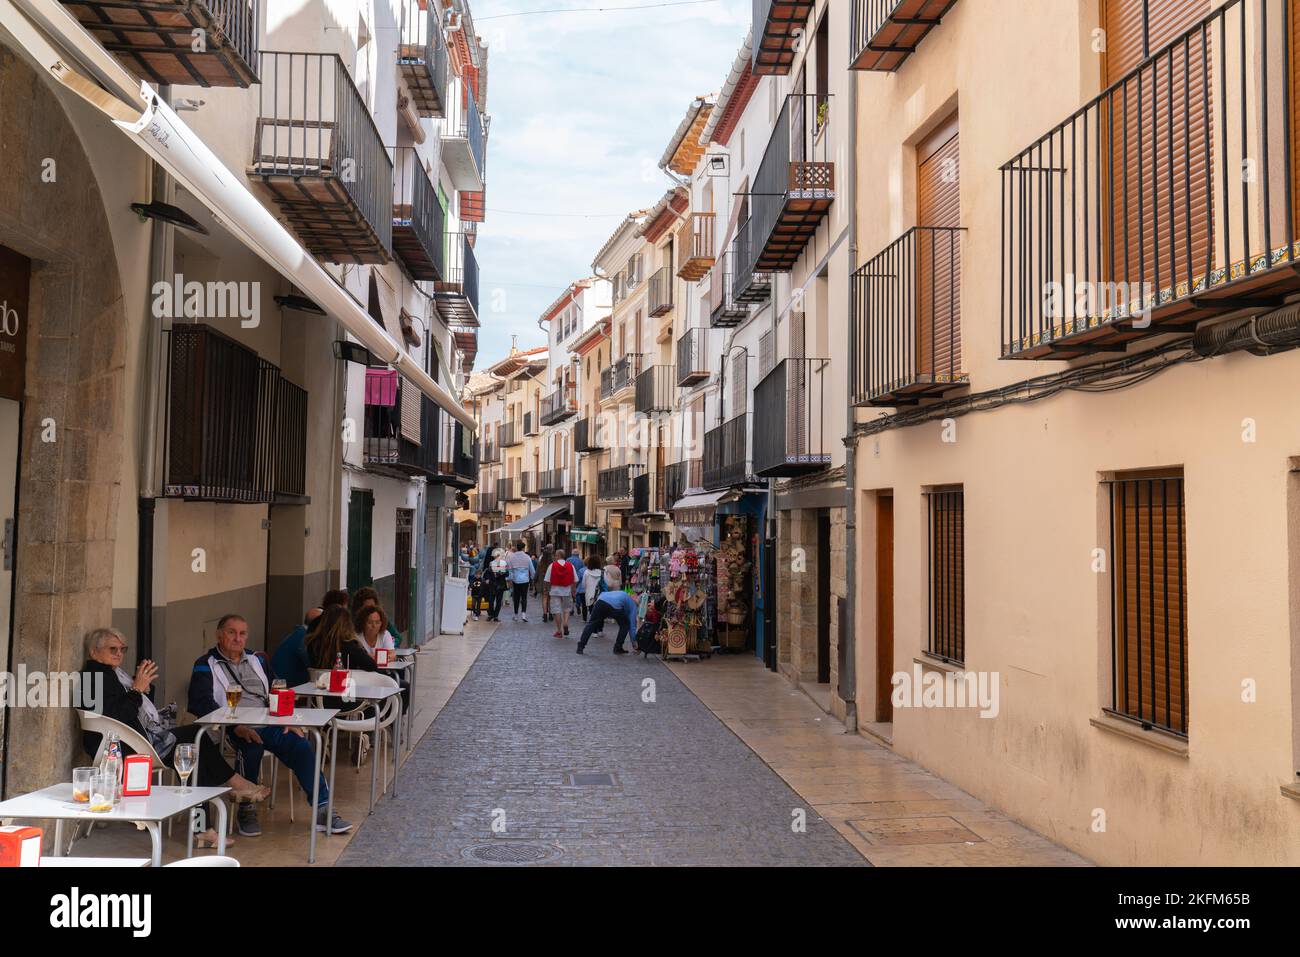 Tourists and visitors in bars and cafes in the town of Morella, Castellon province, Spain Stock Photo